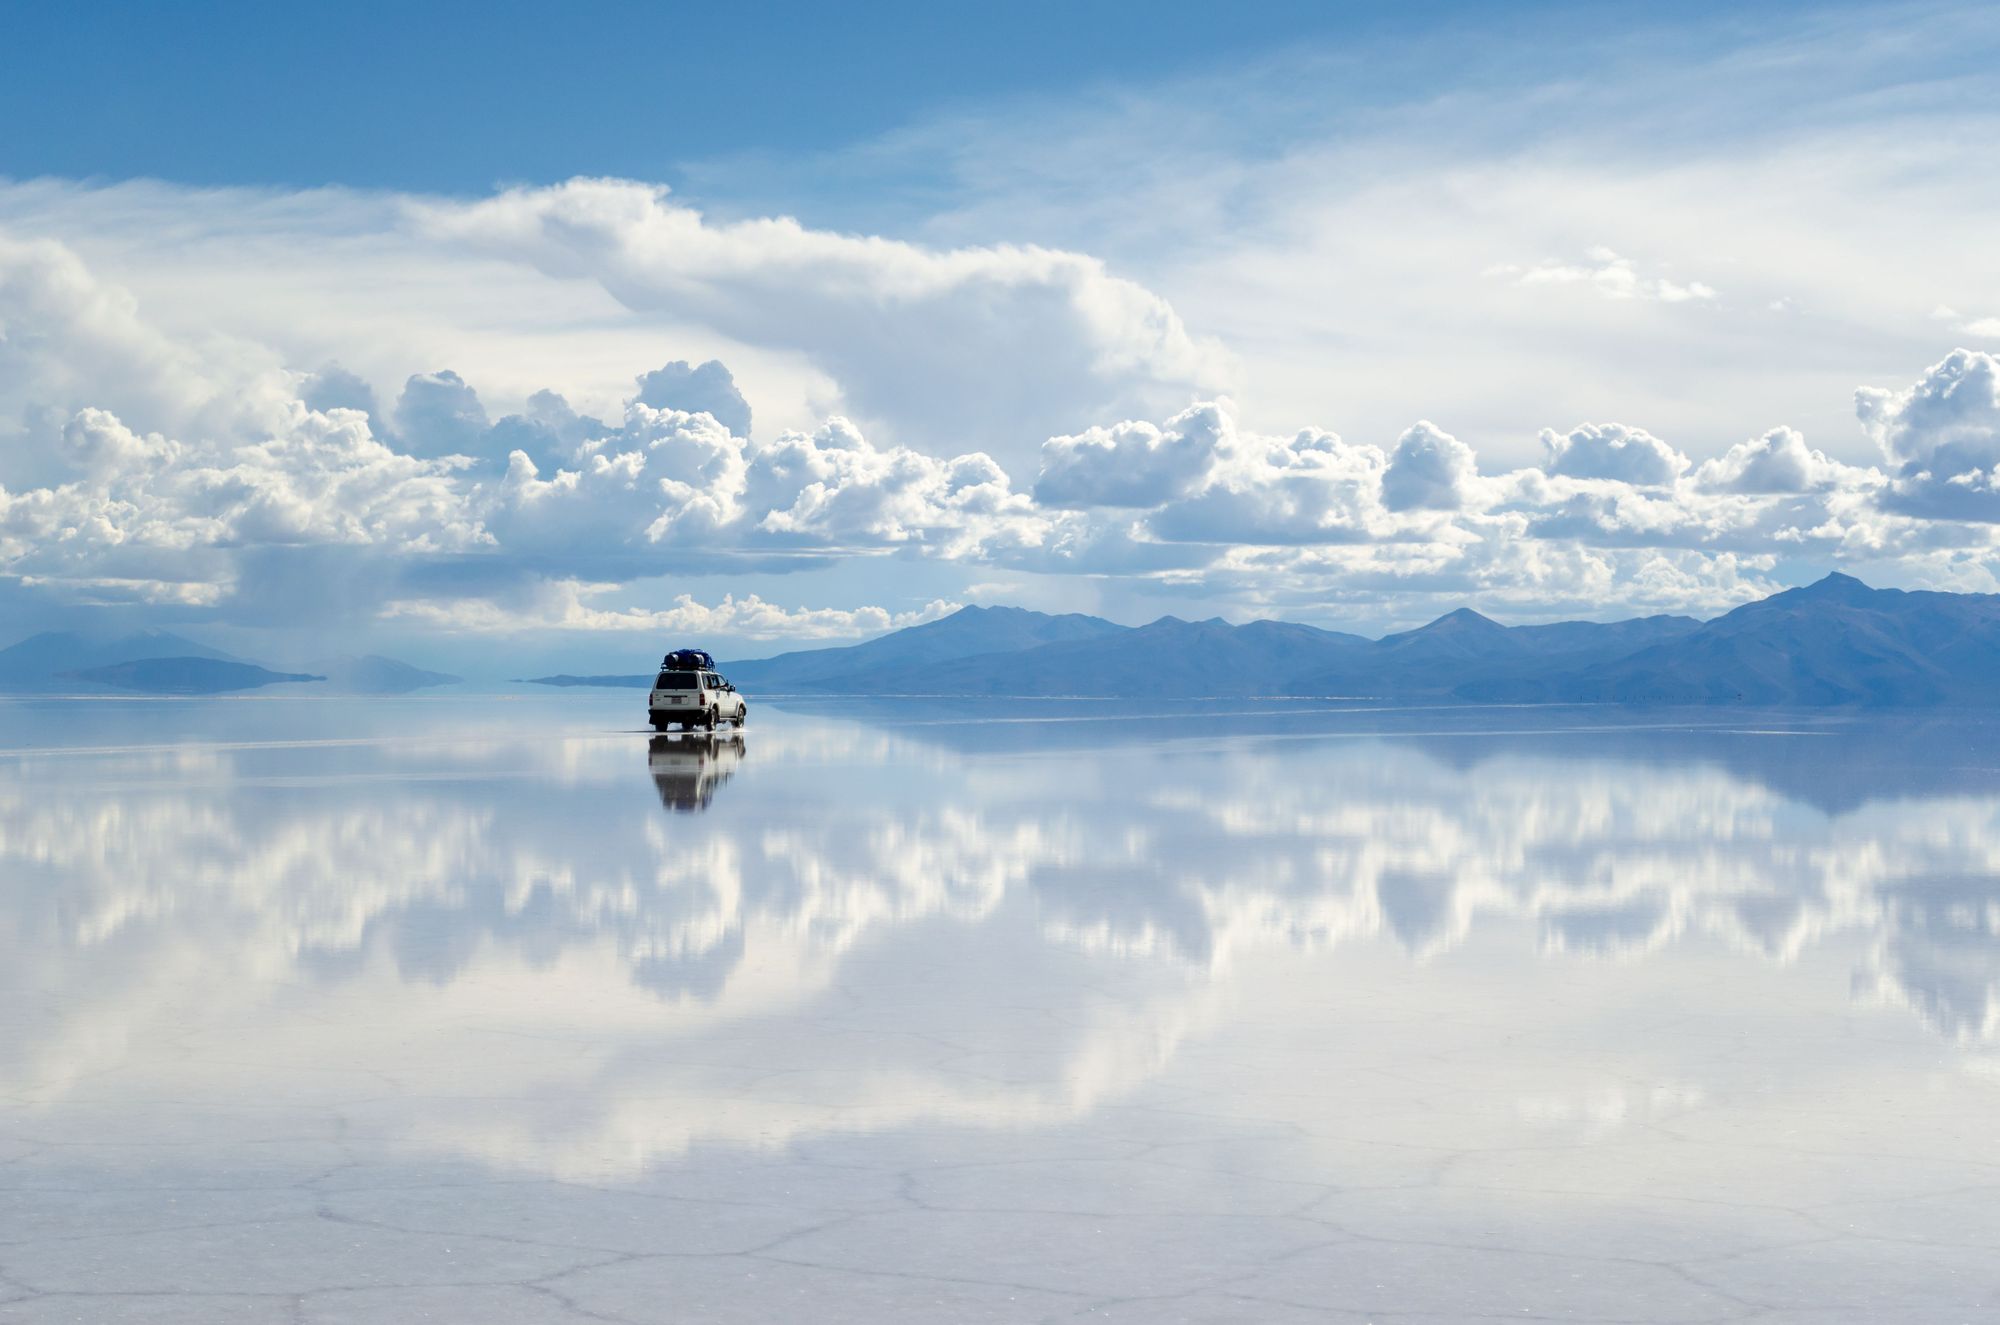 A car drives across the Salar de Uyuni in Bolivia, the largest expanse of salt flats in the world. Photo: Getty